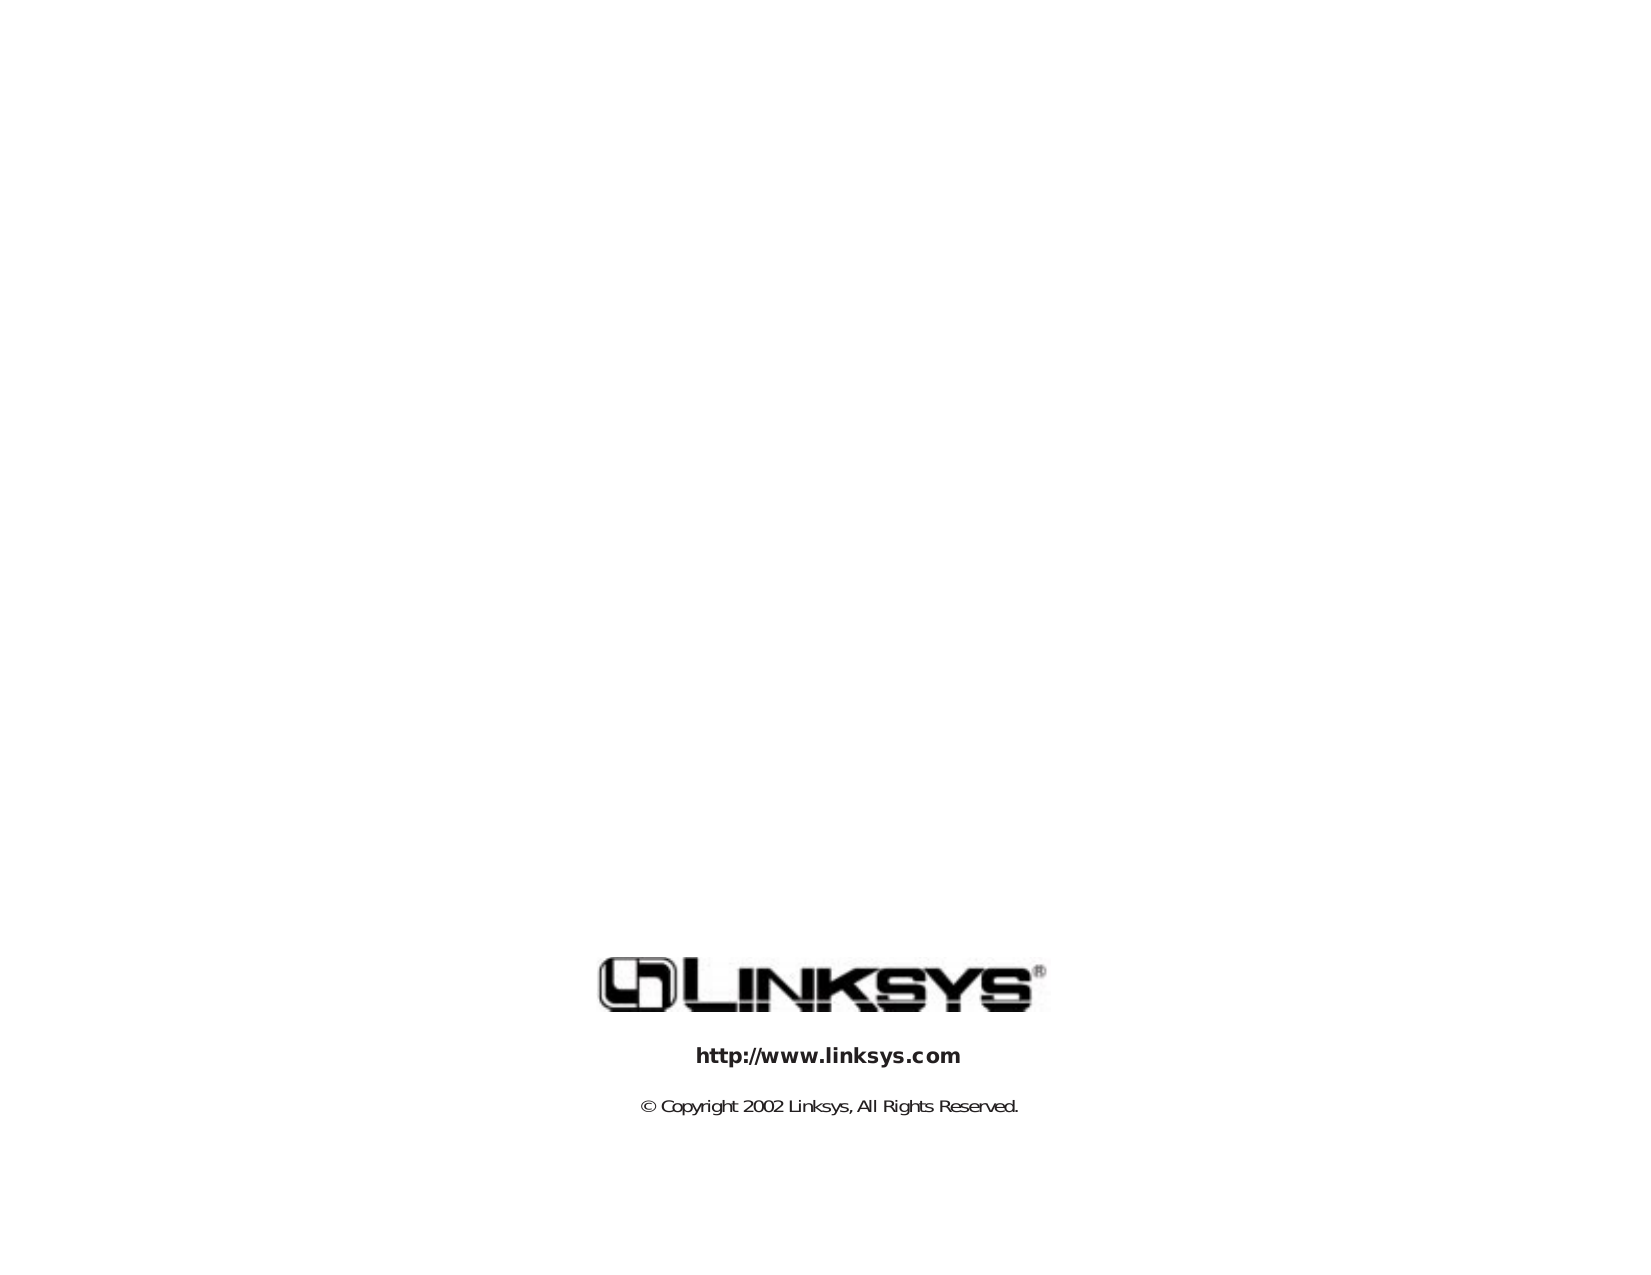 © Copyright 2002 Linksys,All Rights Reserved.http://www.linksys.com